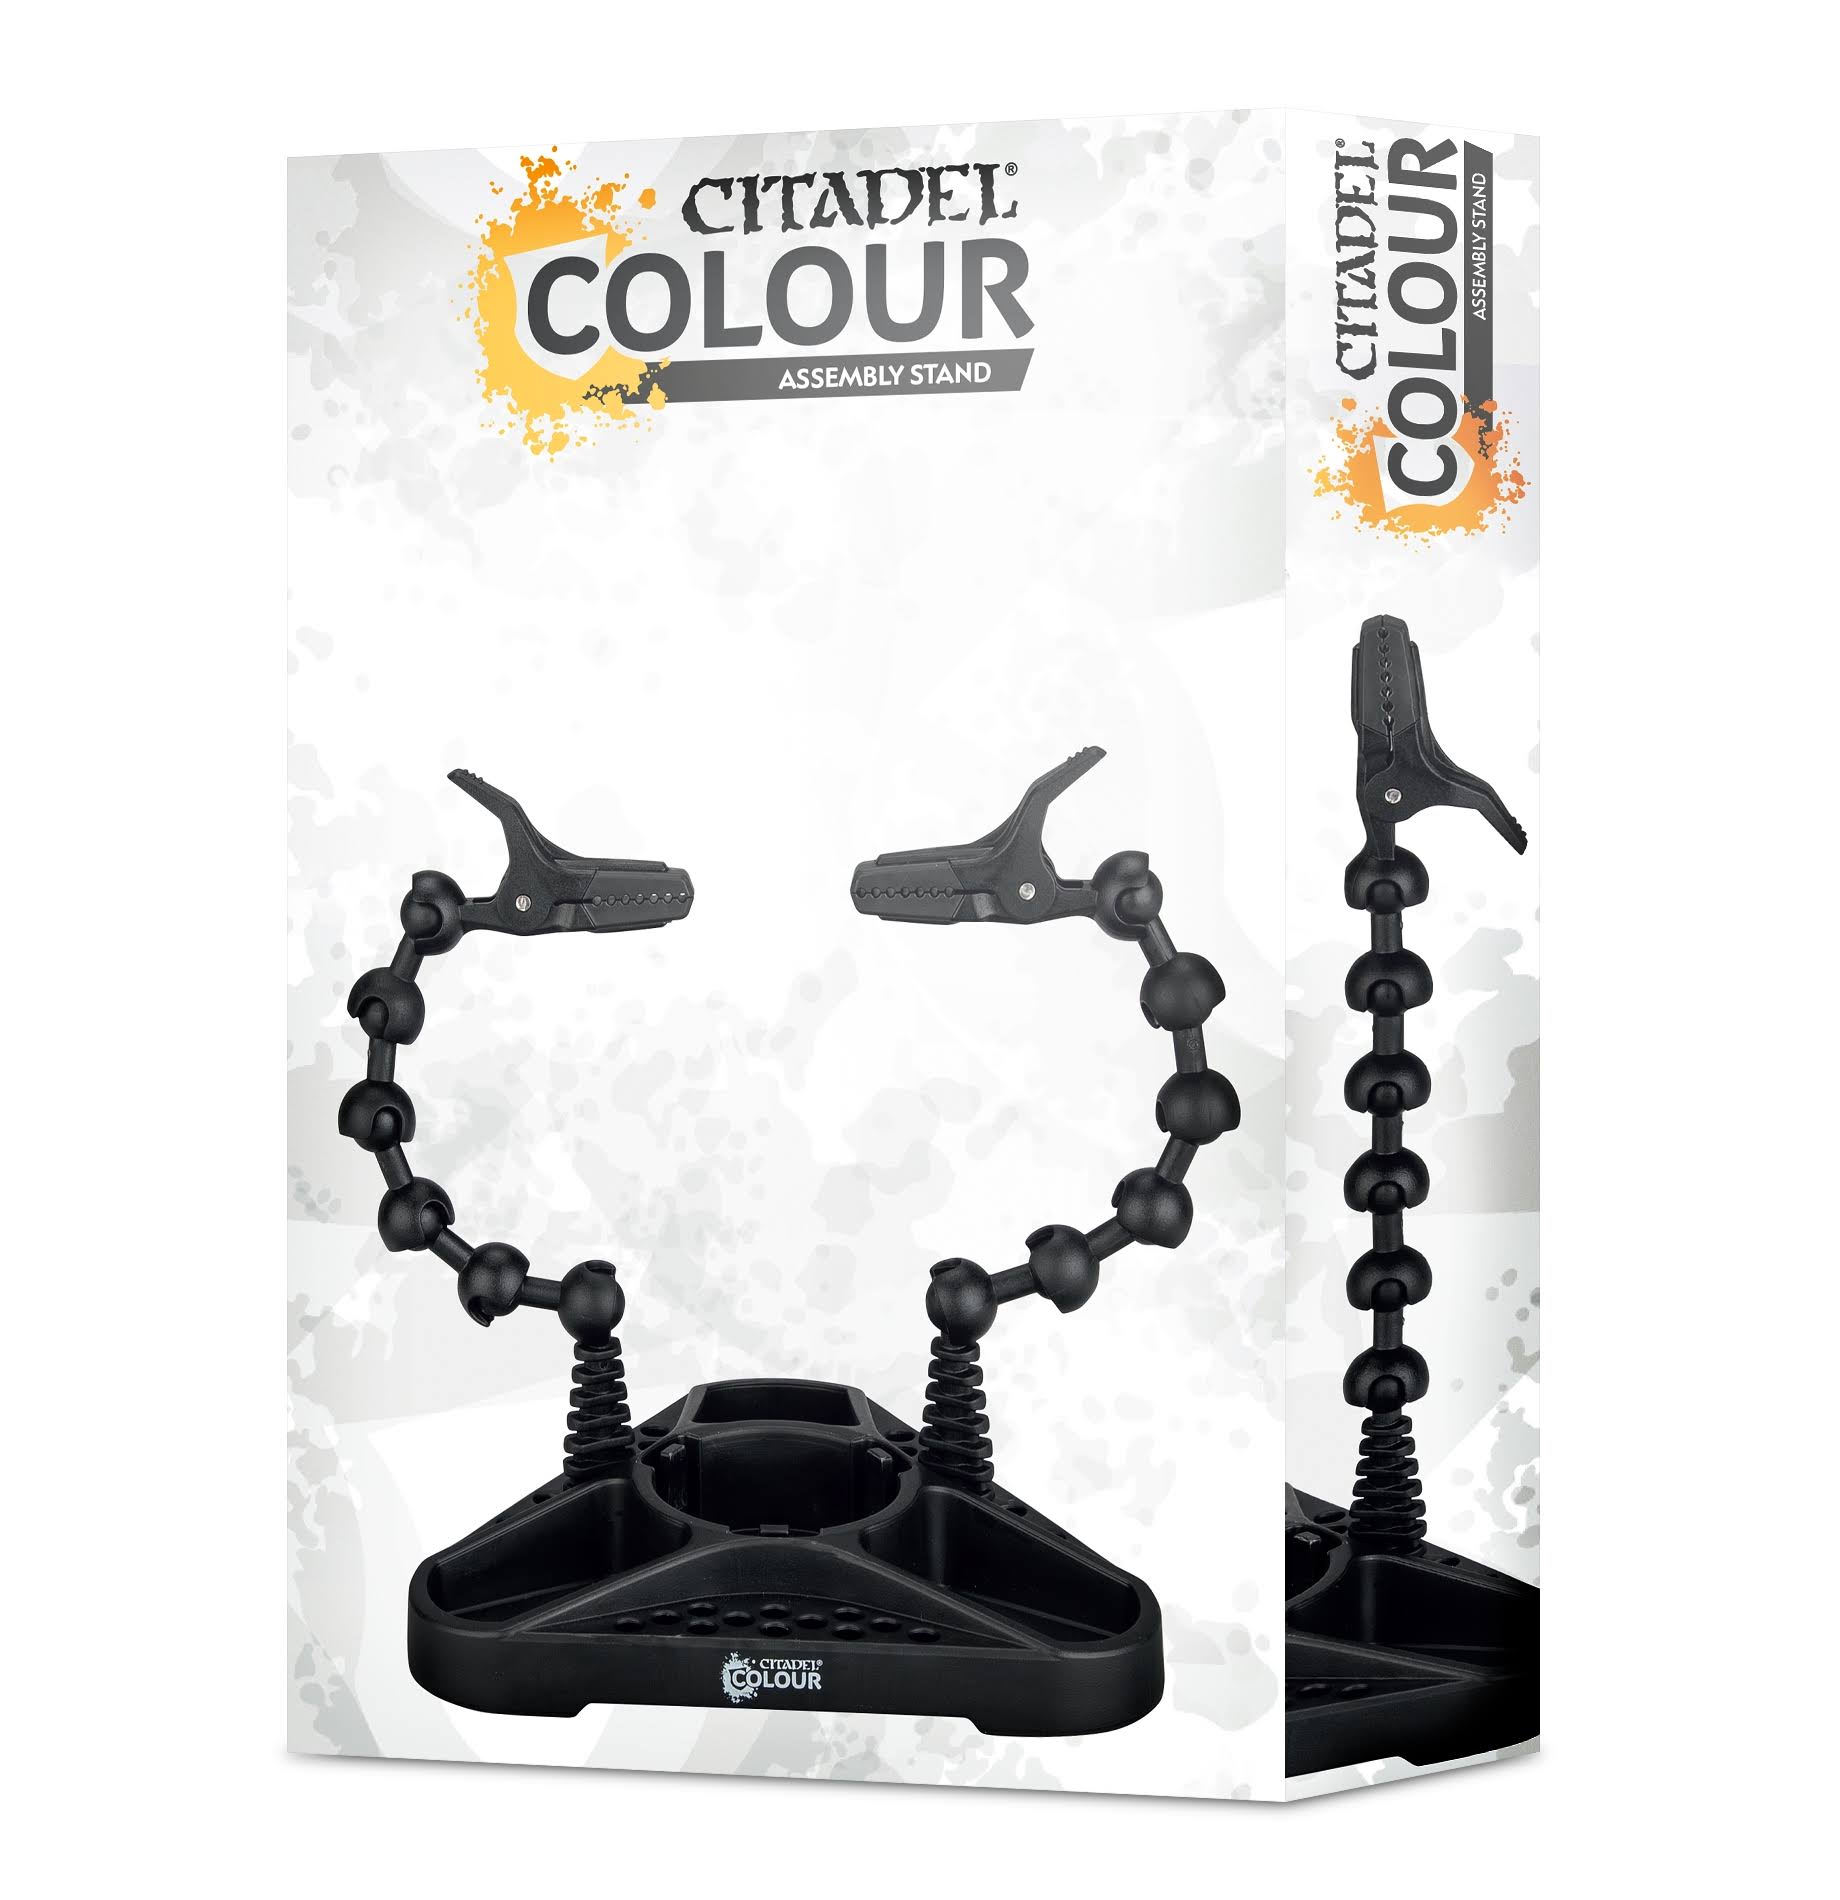 Citadel Colour Assembly Stand, Warhammer 40,000/Age of Sigmar